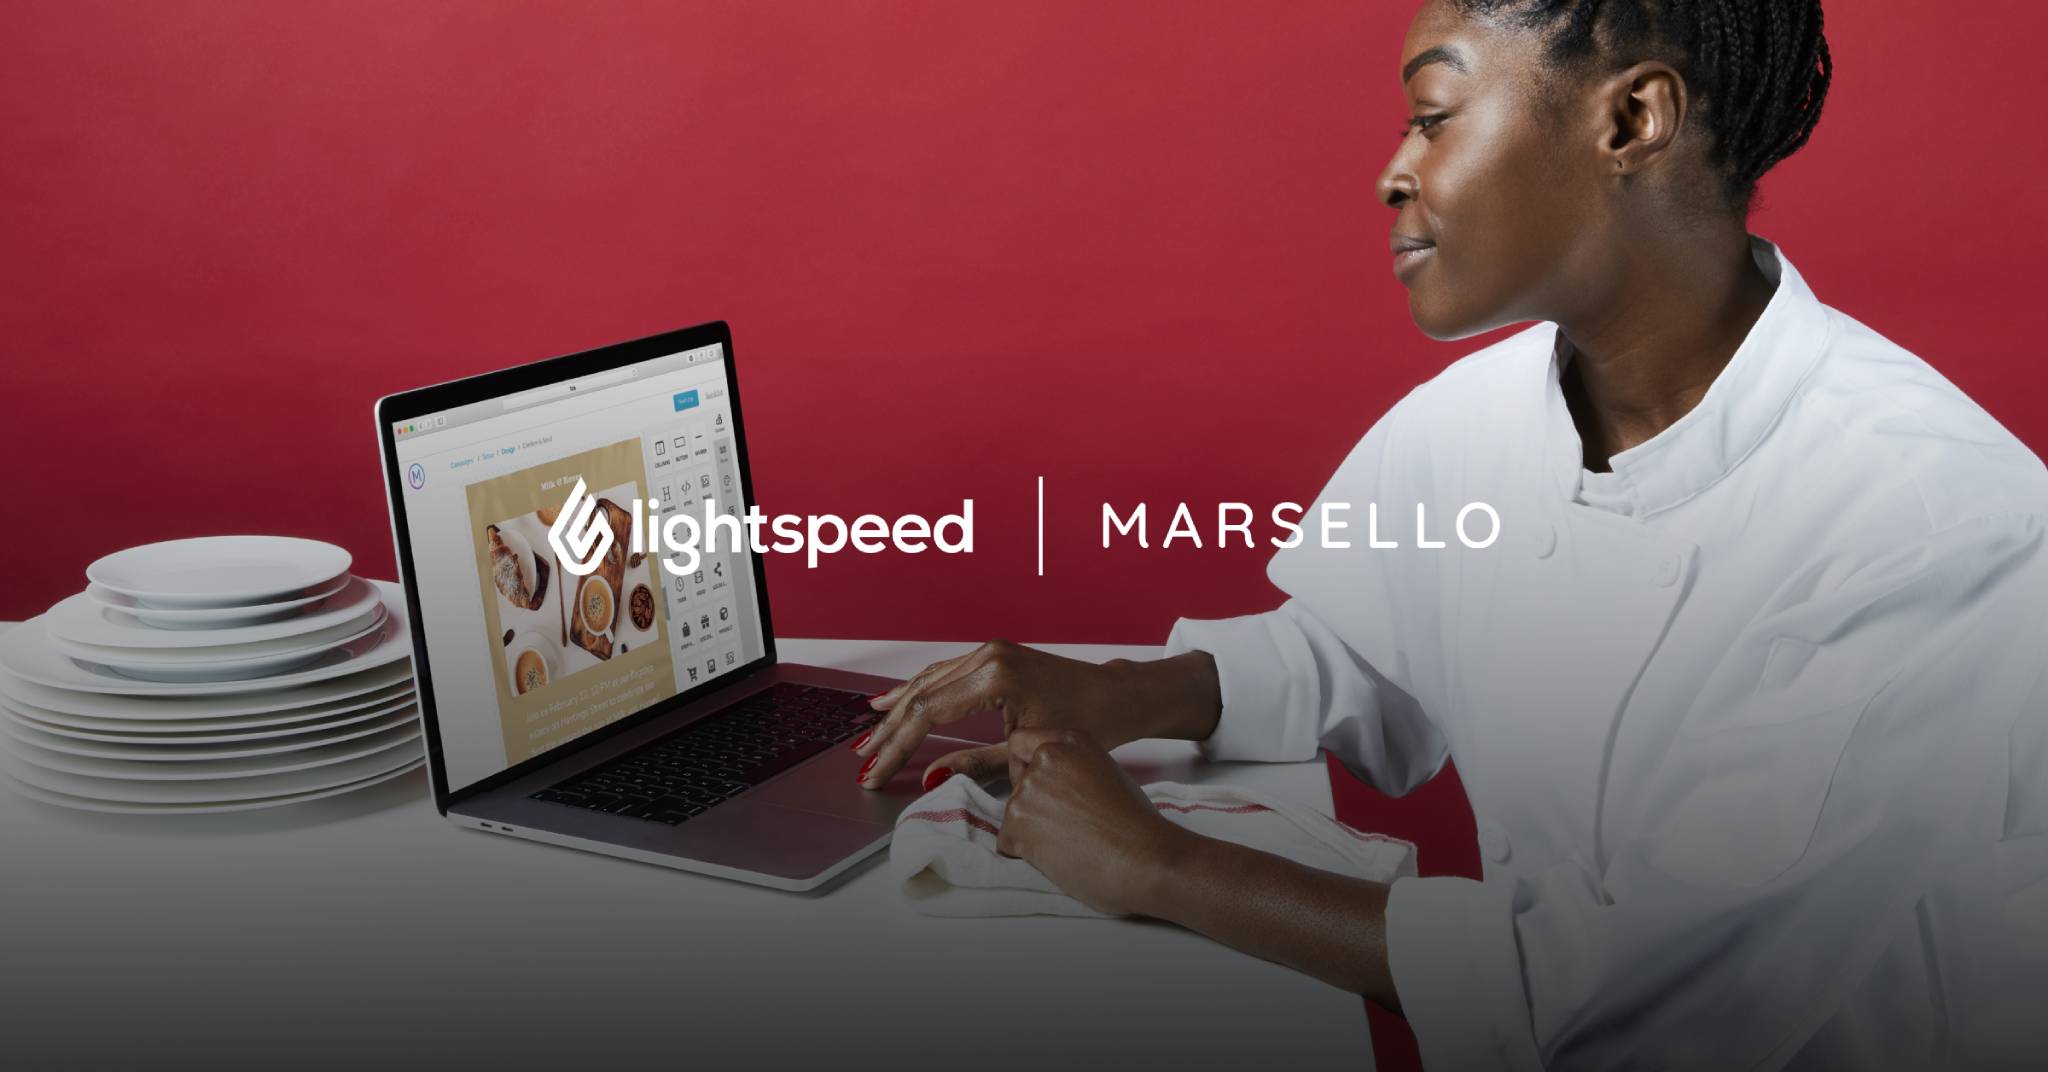 How To Create Customer Relationships With Lightspeed Marketing & Loyalty